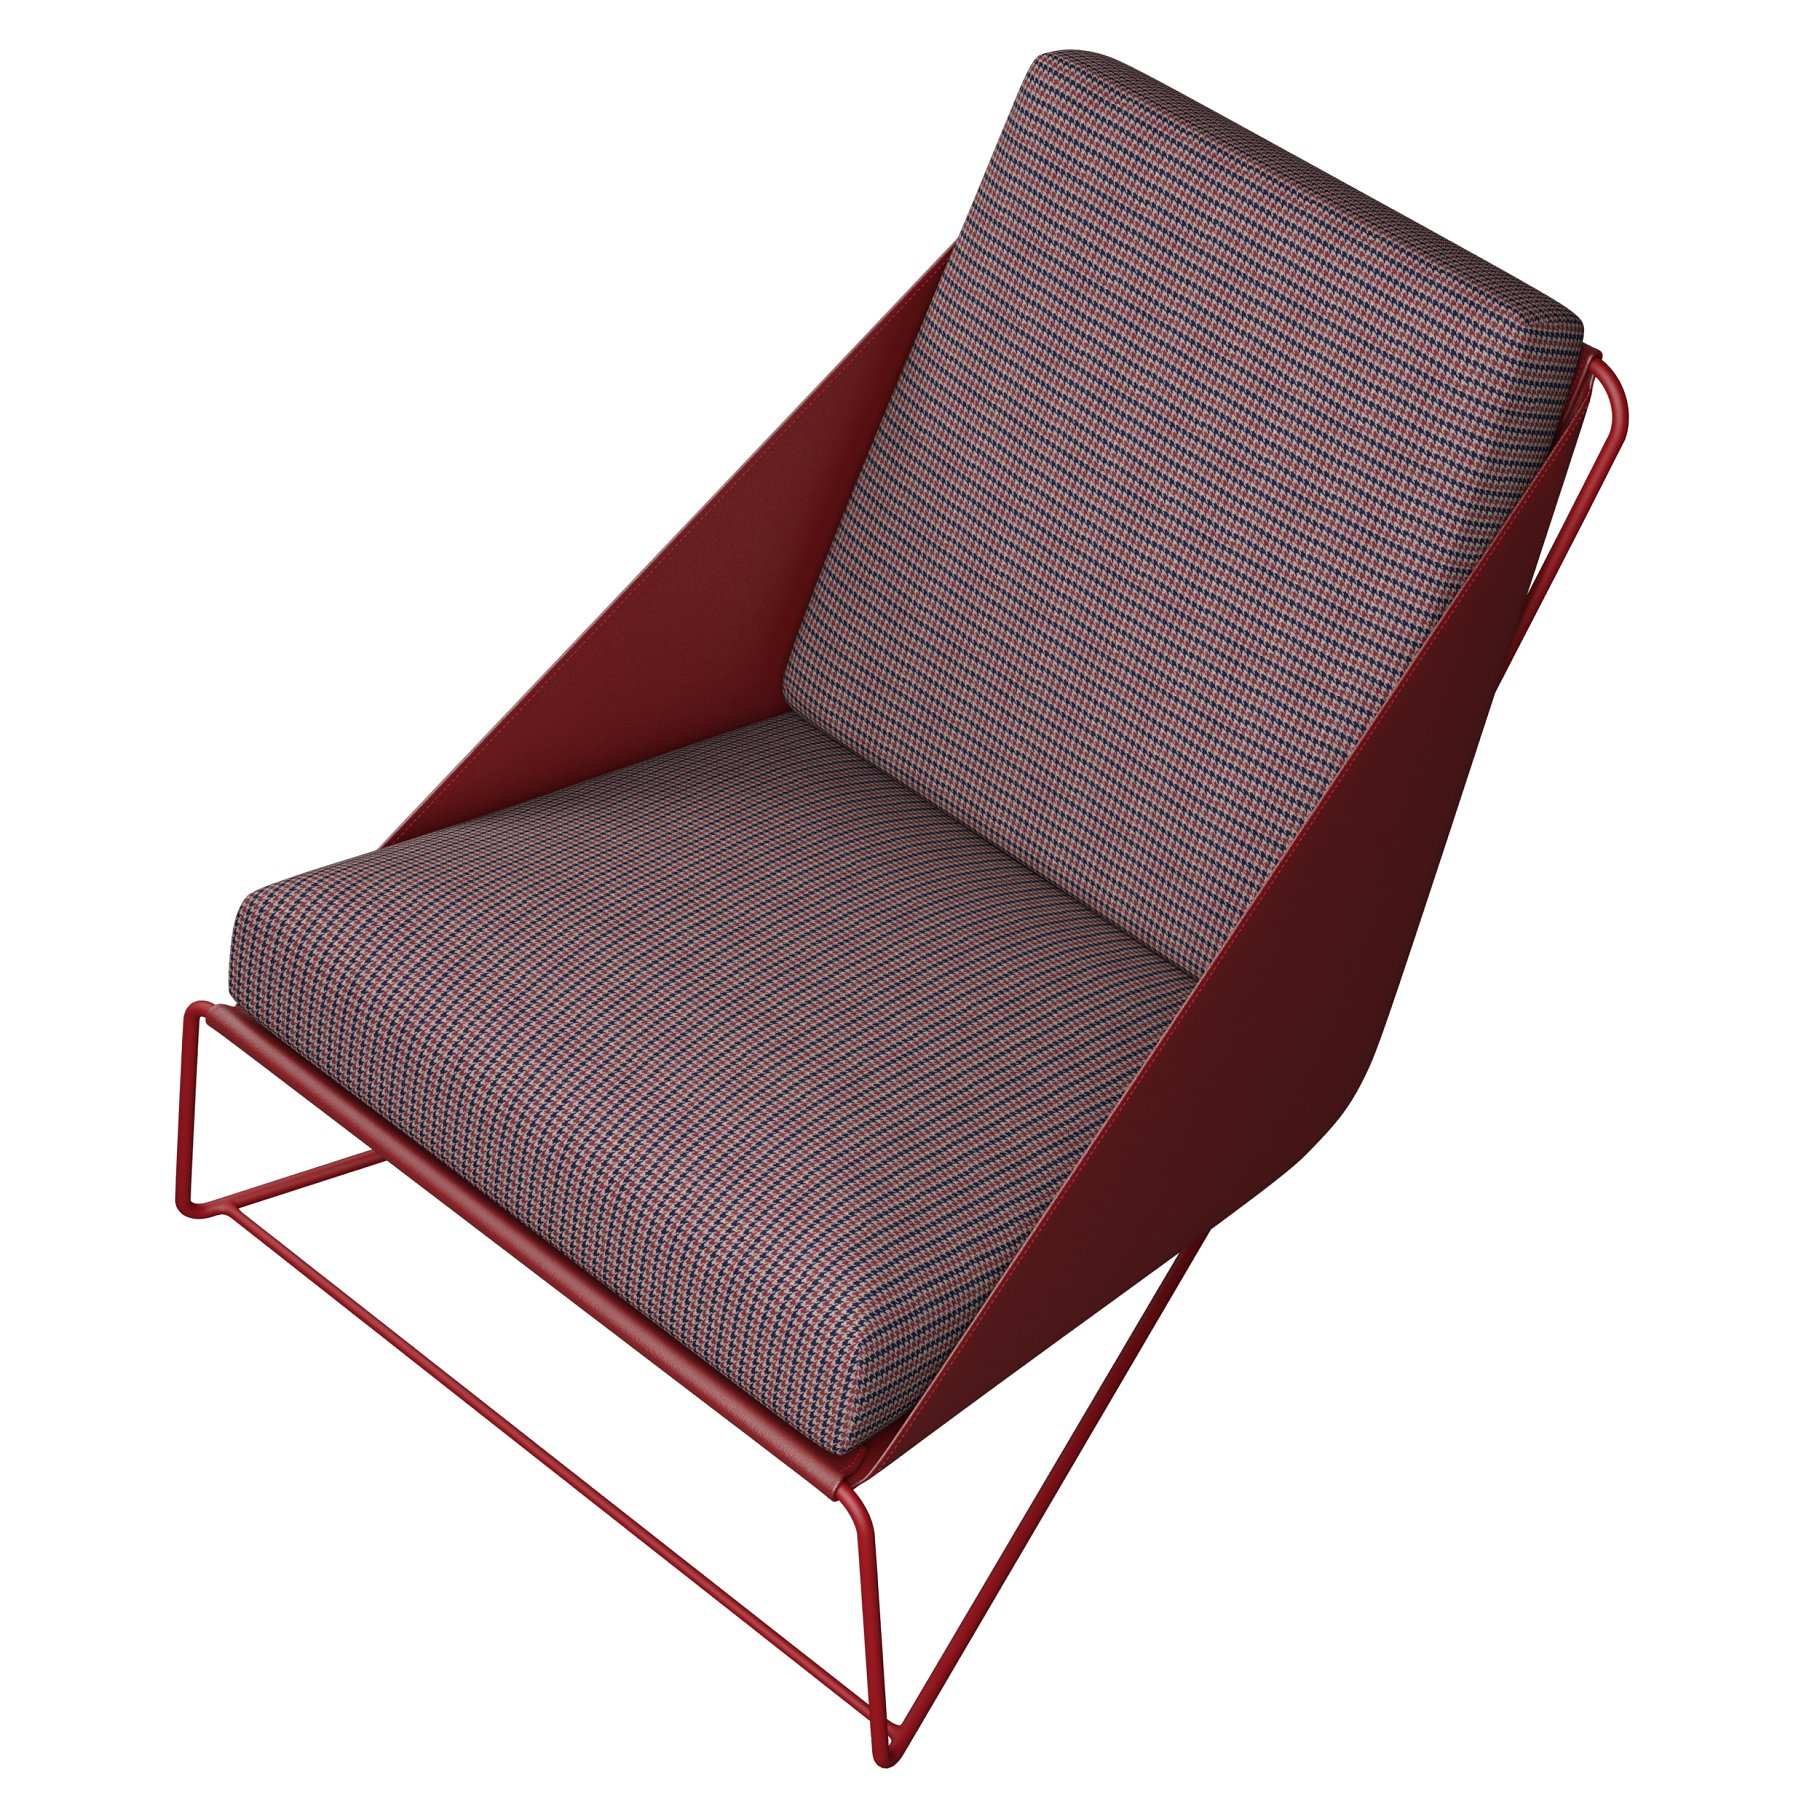 Rendering of a beautiful 3d model of a red chair top view